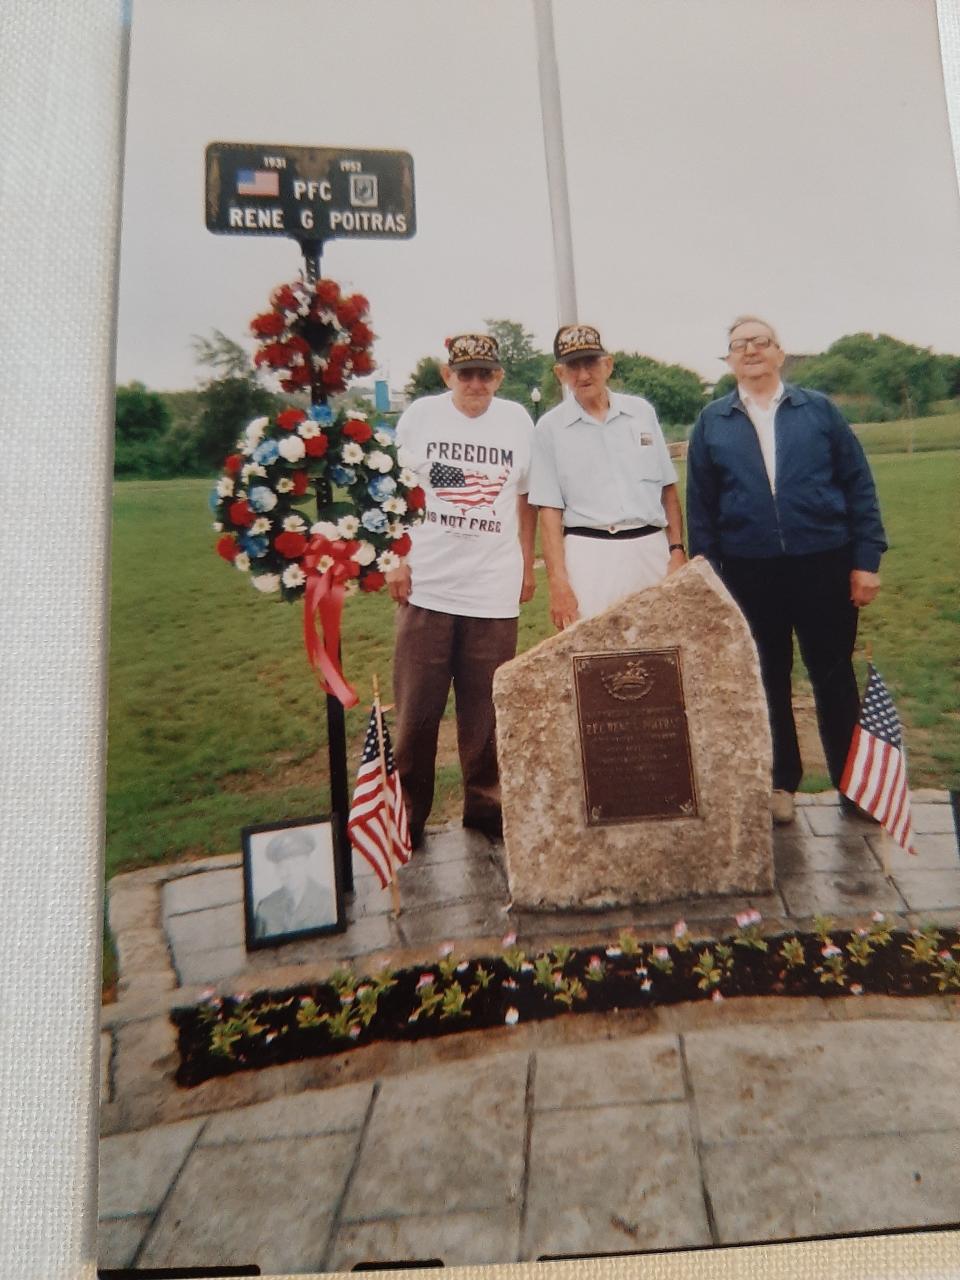 Arthur is pictured here with his two brothers, Paul and Rene, both Korean Veterans, honoring Arthur’s friend PFC Rene G. Poitras.